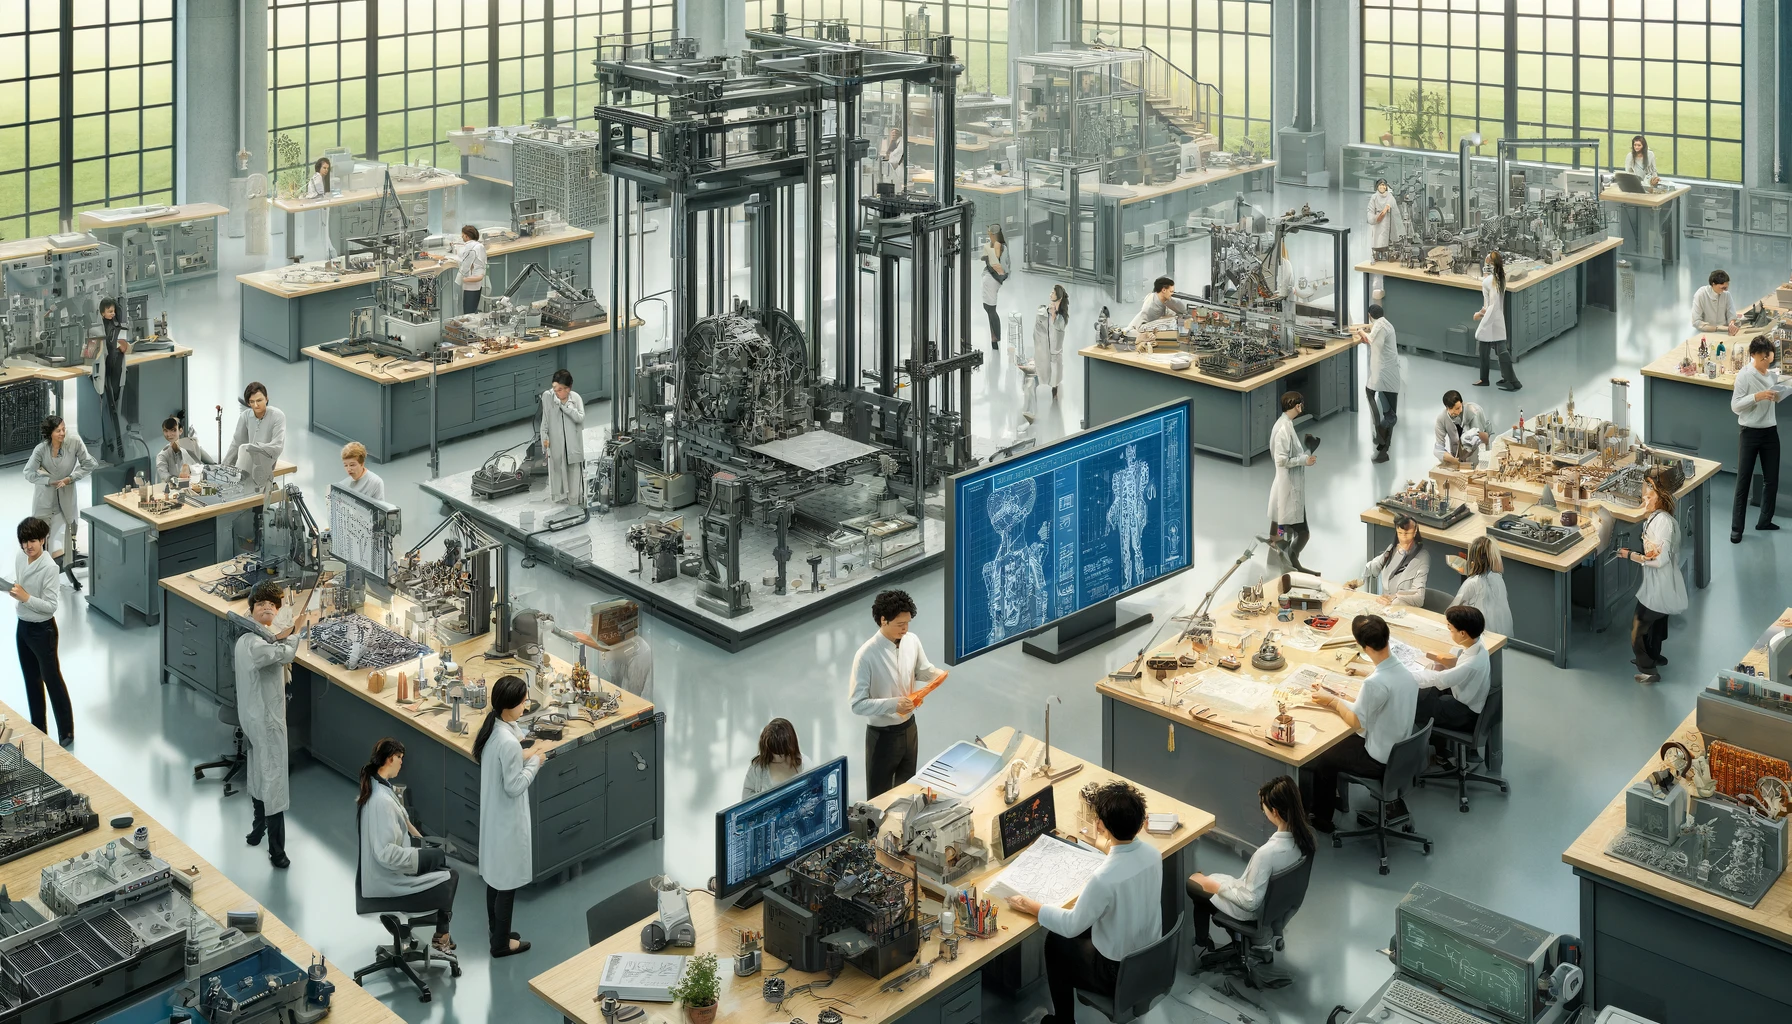 An advanced engineering research scene at Chiba University in Japan. The image depicts a high-tech laboratory setting with diverse groups of Asian students working on sophisticated projects. Features include students using large 3D printers, robotic arms, and other cutting-edge technology. The lab is filled with equipment like computers, engineering tools, and experiment setups. Some students are discussing over blueprints and computer screens, showcasing a collaborative and innovative environment. The background shows large windows overlooking a green campus, suggesting a blend of nature and technology.